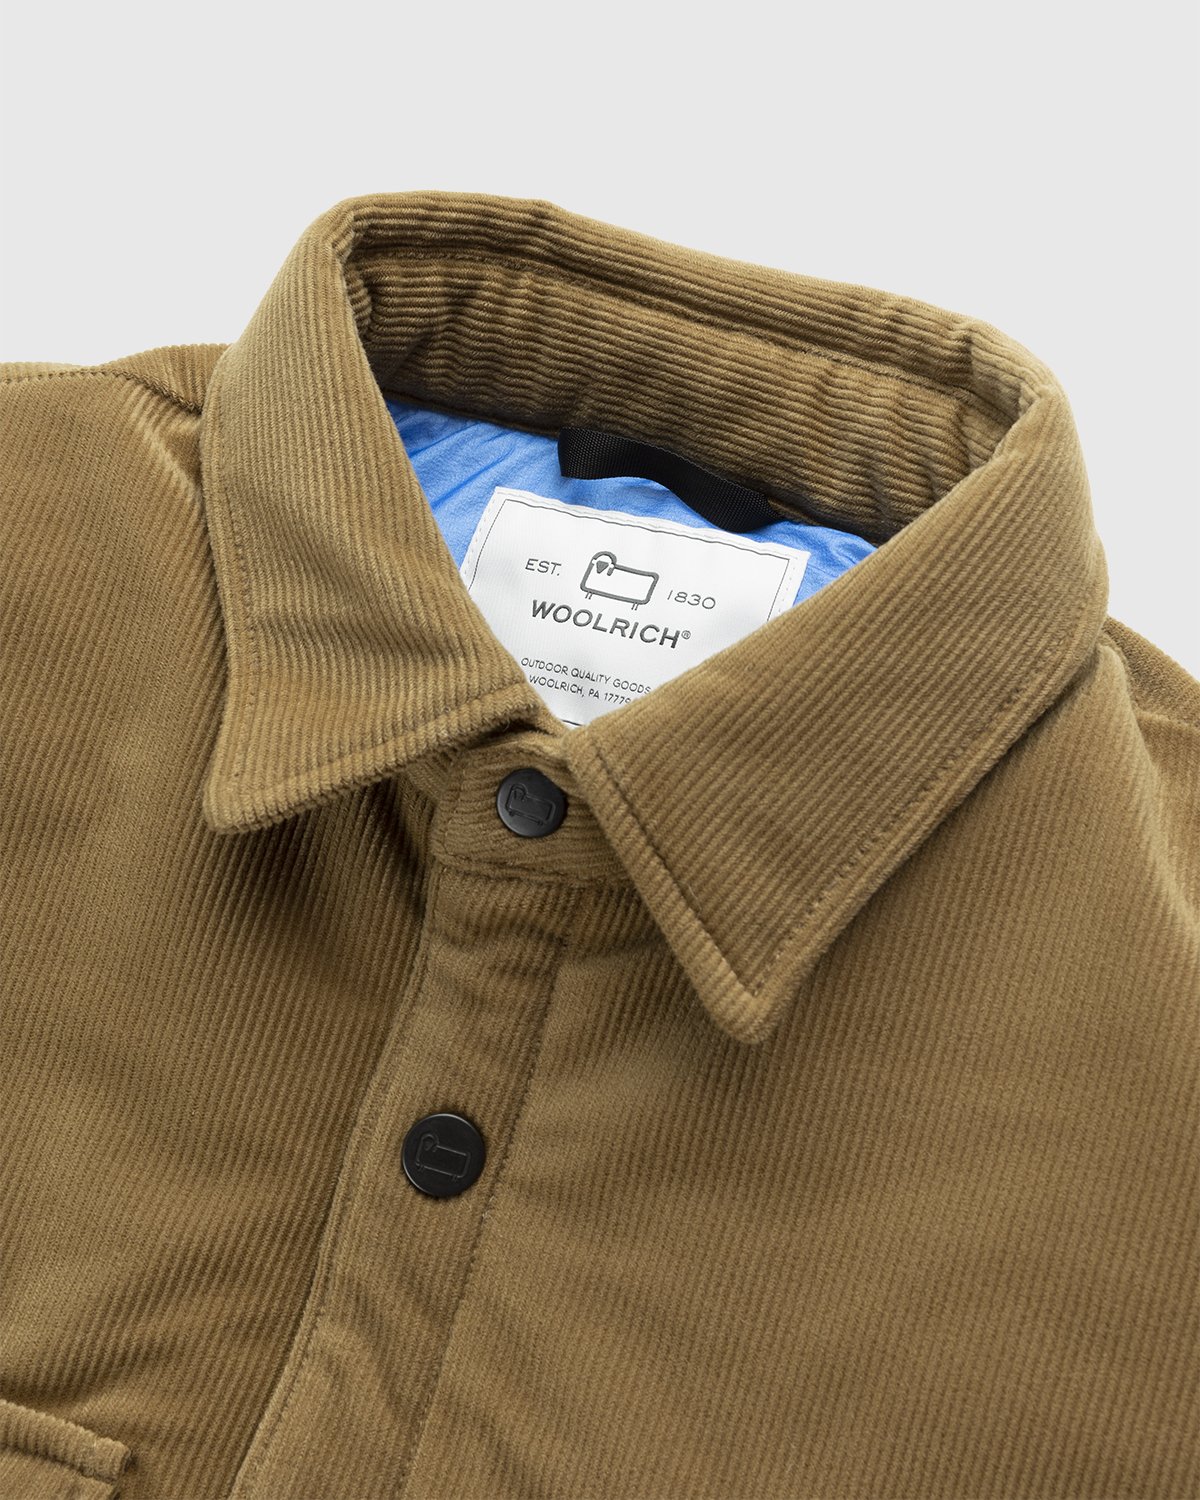 Woolrich - GORE-TEX Corduroy Insulated Shirt Beige - Clothing - Beige - Image 4